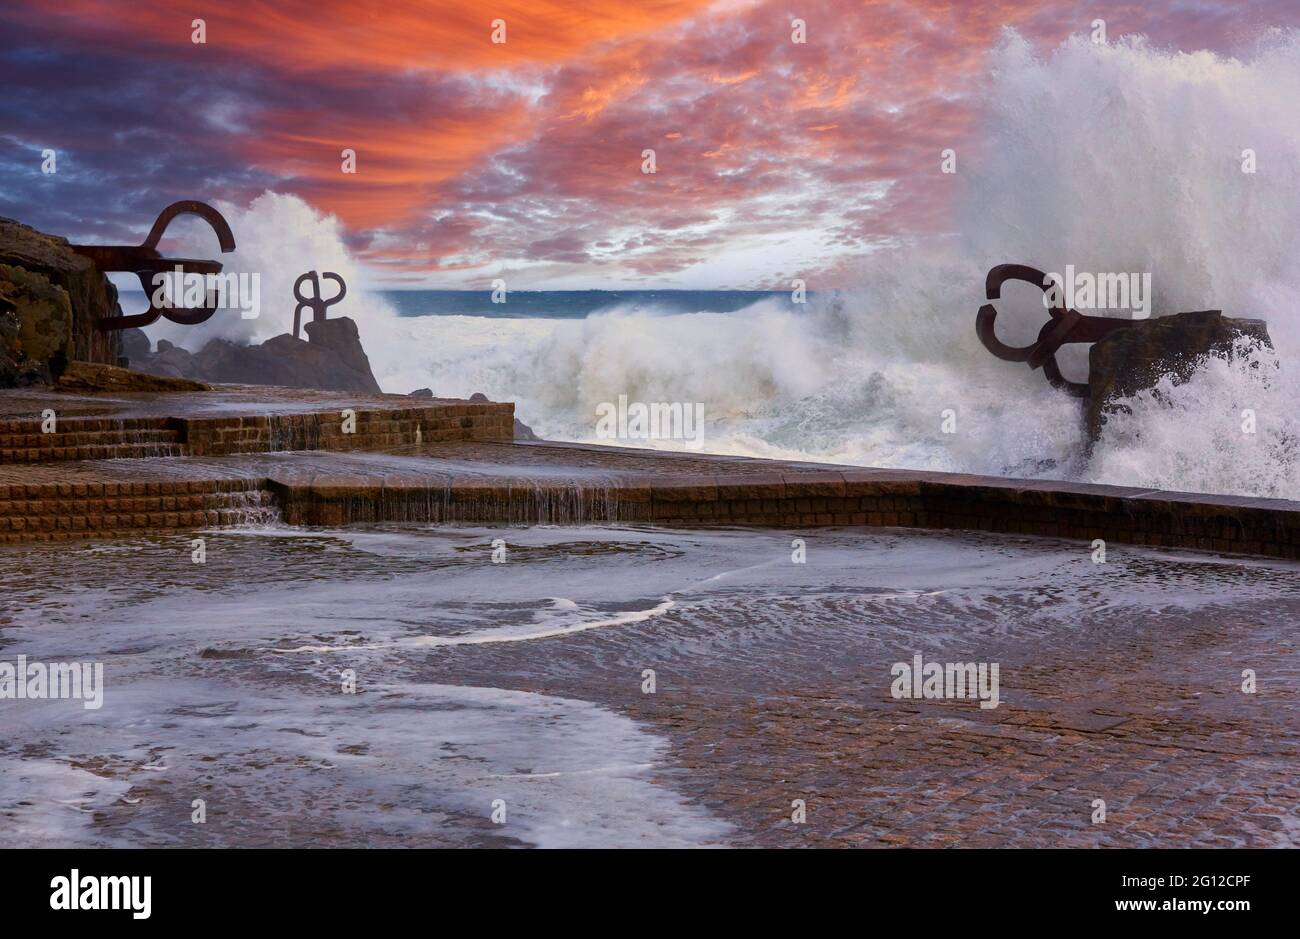 Storm with waves of 7 meters on the Basque coast, Orange alert in the Cantabrian coast, Peine del Viento, Sculpture by Eduardo Chillida Donostia, San Stock Photo